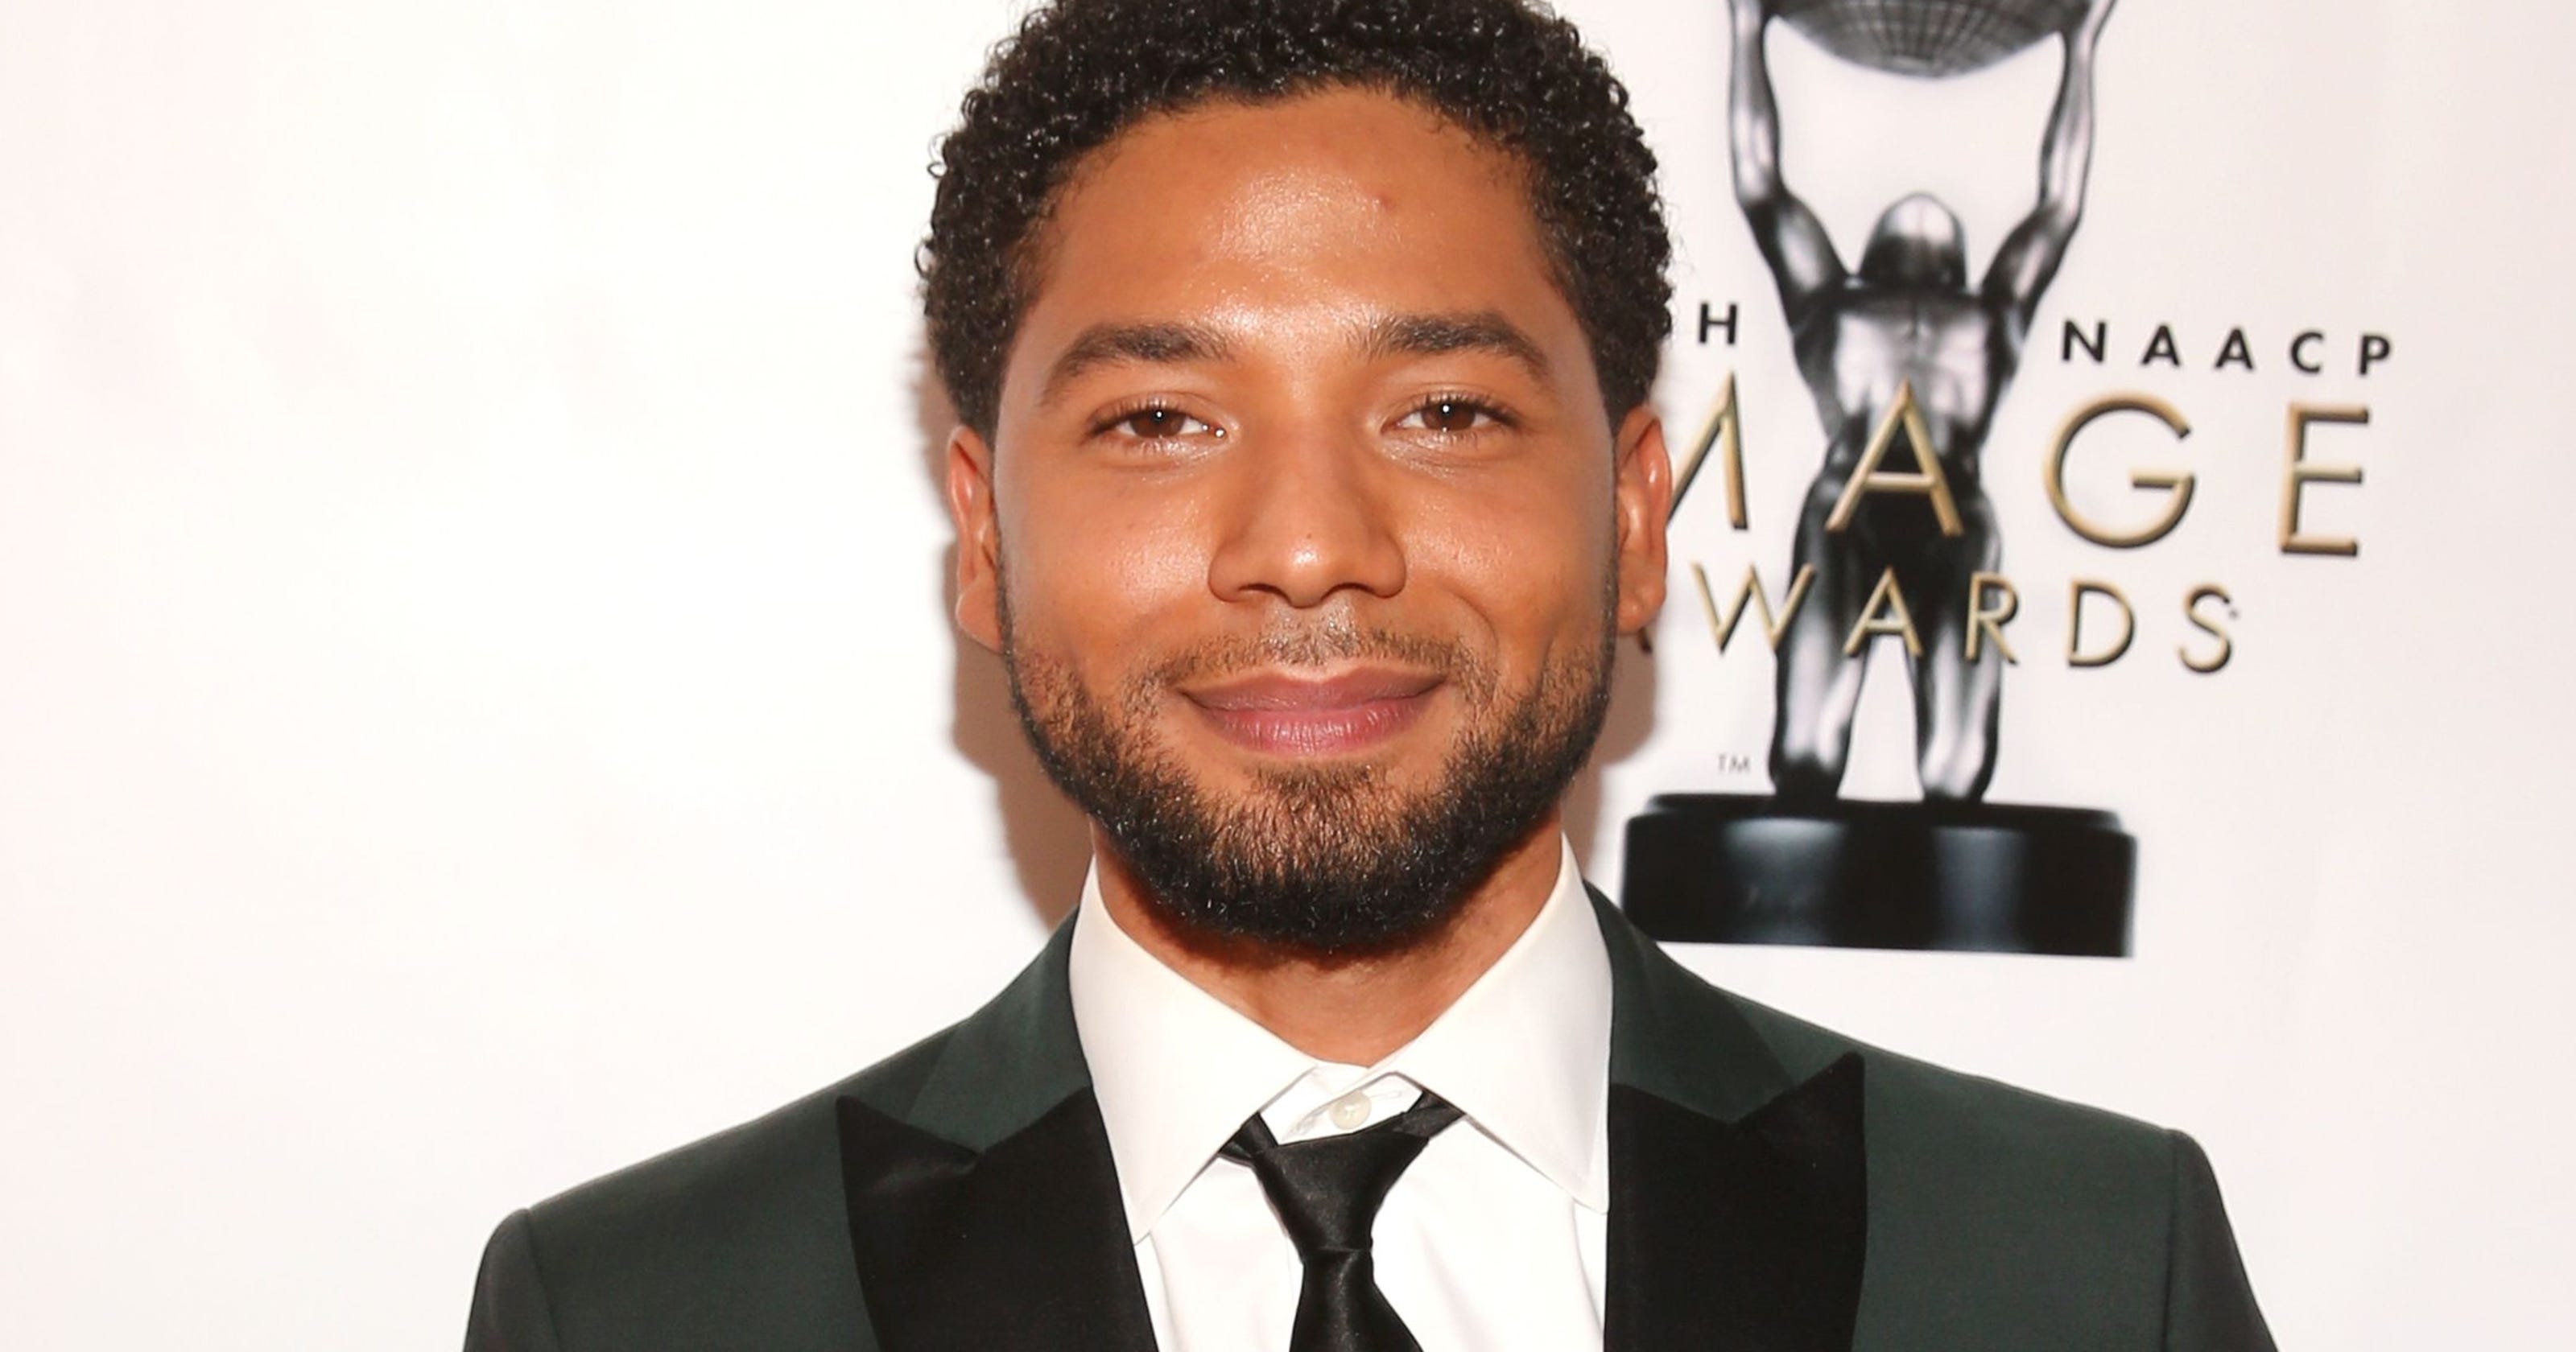 Jussie Smollett, Empire star, assaulted in possible homophobic attack